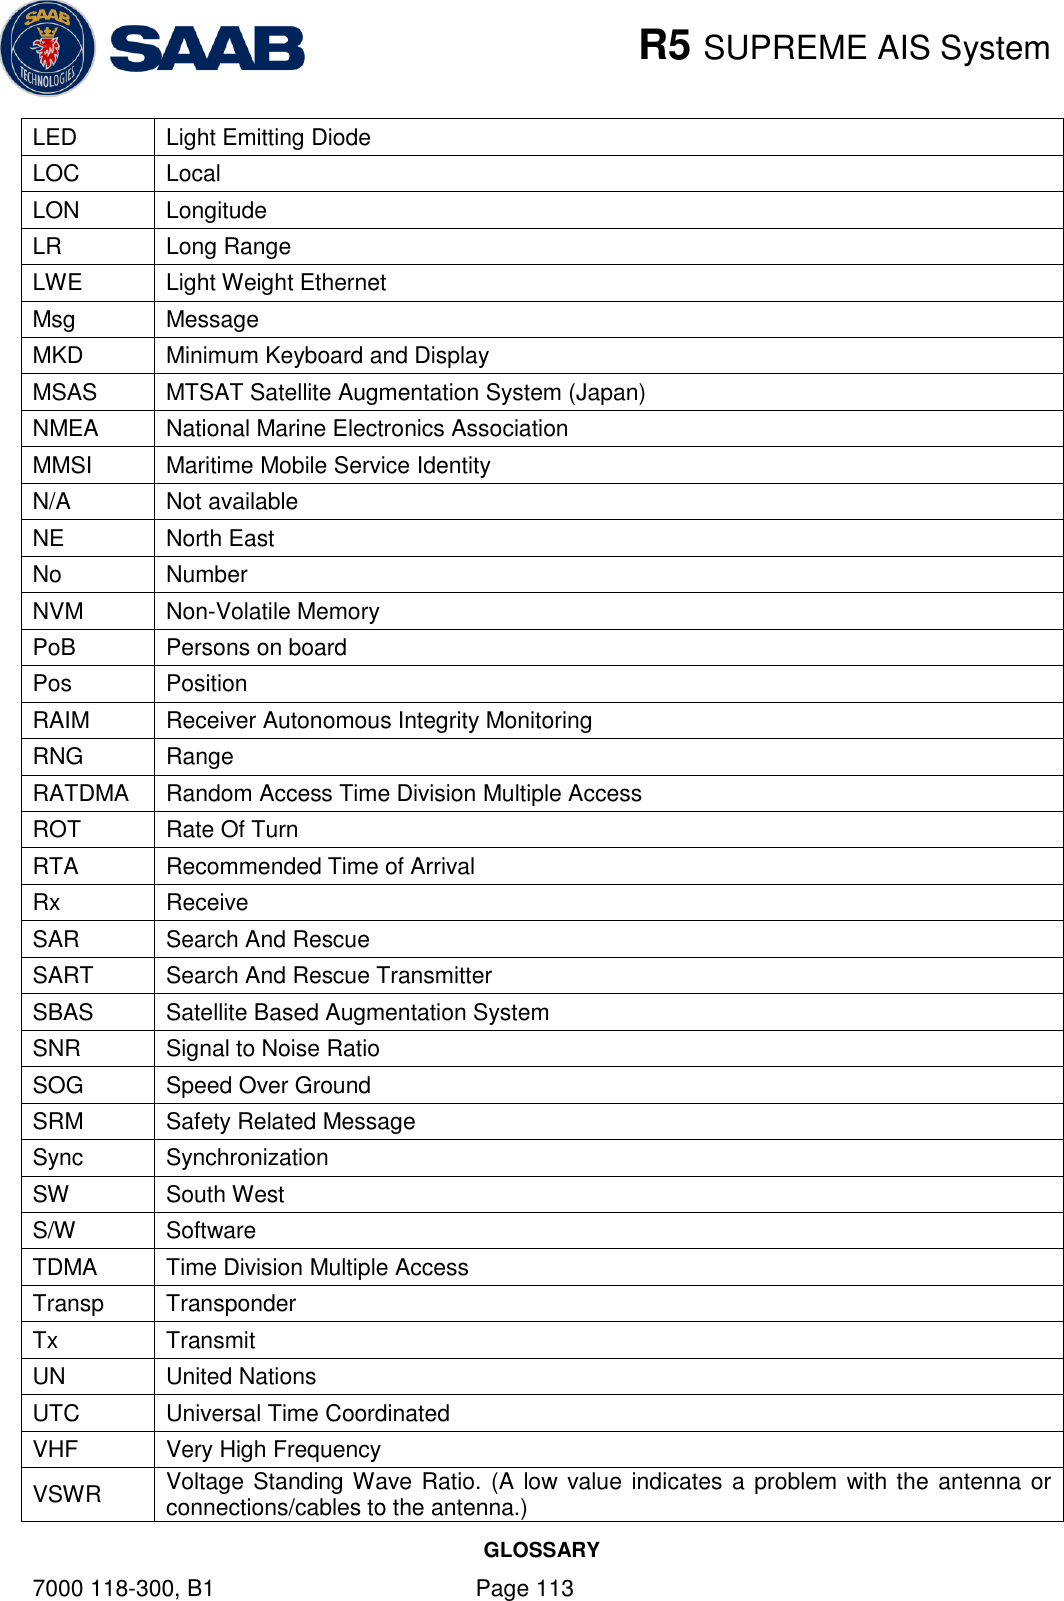    R5 SUPREME AIS System GLOSSARY 7000 118-300, B1    Page 113 LED Light Emitting Diode LOC Local LON Longitude LR Long Range LWE Light Weight Ethernet Msg Message MKD Minimum Keyboard and Display MSAS MTSAT Satellite Augmentation System (Japan) NMEA National Marine Electronics Association MMSI Maritime Mobile Service Identity N/A Not available NE North East No Number NVM Non-Volatile Memory PoB Persons on board Pos Position RAIM Receiver Autonomous Integrity Monitoring RNG Range RATDMA Random Access Time Division Multiple Access ROT Rate Of Turn RTA Recommended Time of Arrival Rx Receive SAR Search And Rescue SART Search And Rescue Transmitter SBAS Satellite Based Augmentation System SNR Signal to Noise Ratio SOG Speed Over Ground SRM Safety Related Message Sync Synchronization SW South West S/W Software TDMA Time Division Multiple Access Transp Transponder Tx Transmit UN United Nations UTC Universal Time Coordinated VHF Very High Frequency VSWR Voltage Standing Wave Ratio. (A low value indicates a problem with the antenna or connections/cables to the antenna.) 